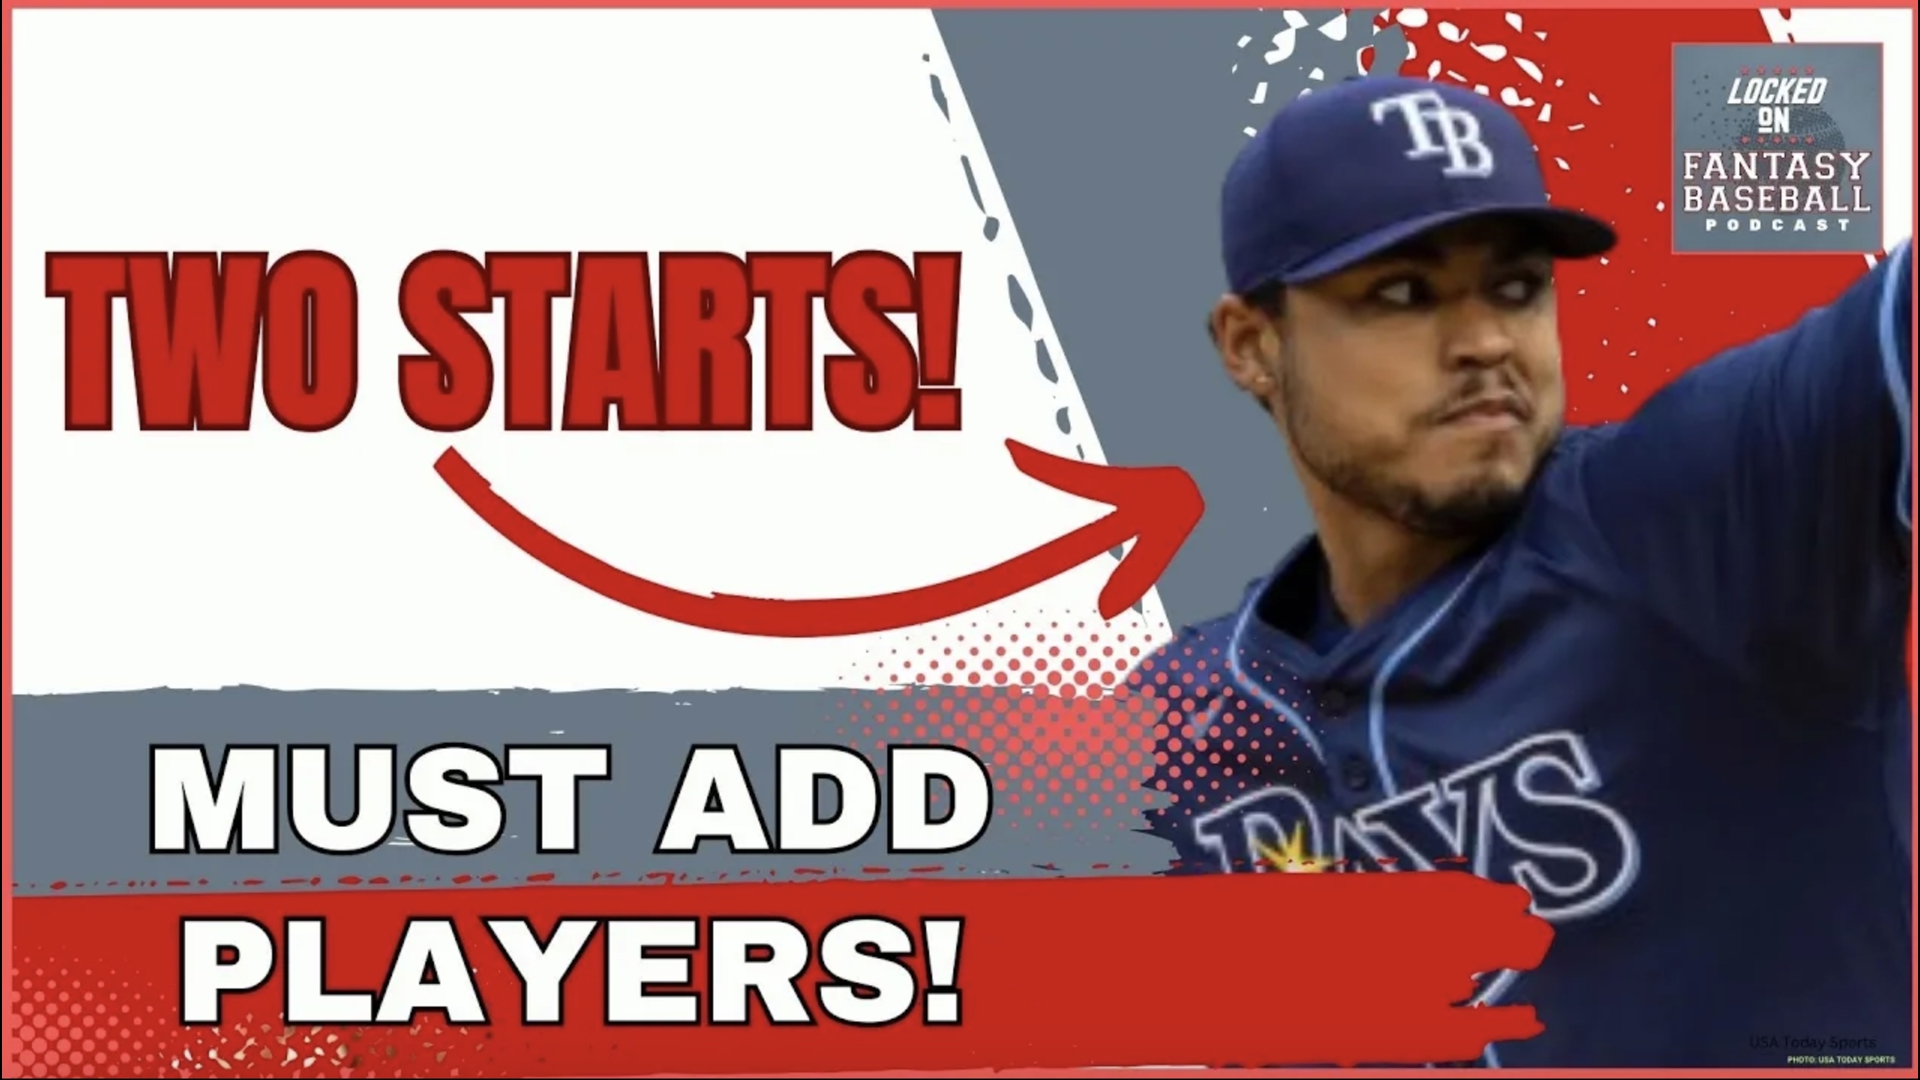 Get ahead this week with our top picks for two-star pitchers and must-add hitters! 🏆 Find out who you need to add to your fantasy roster to dominate Week 14.